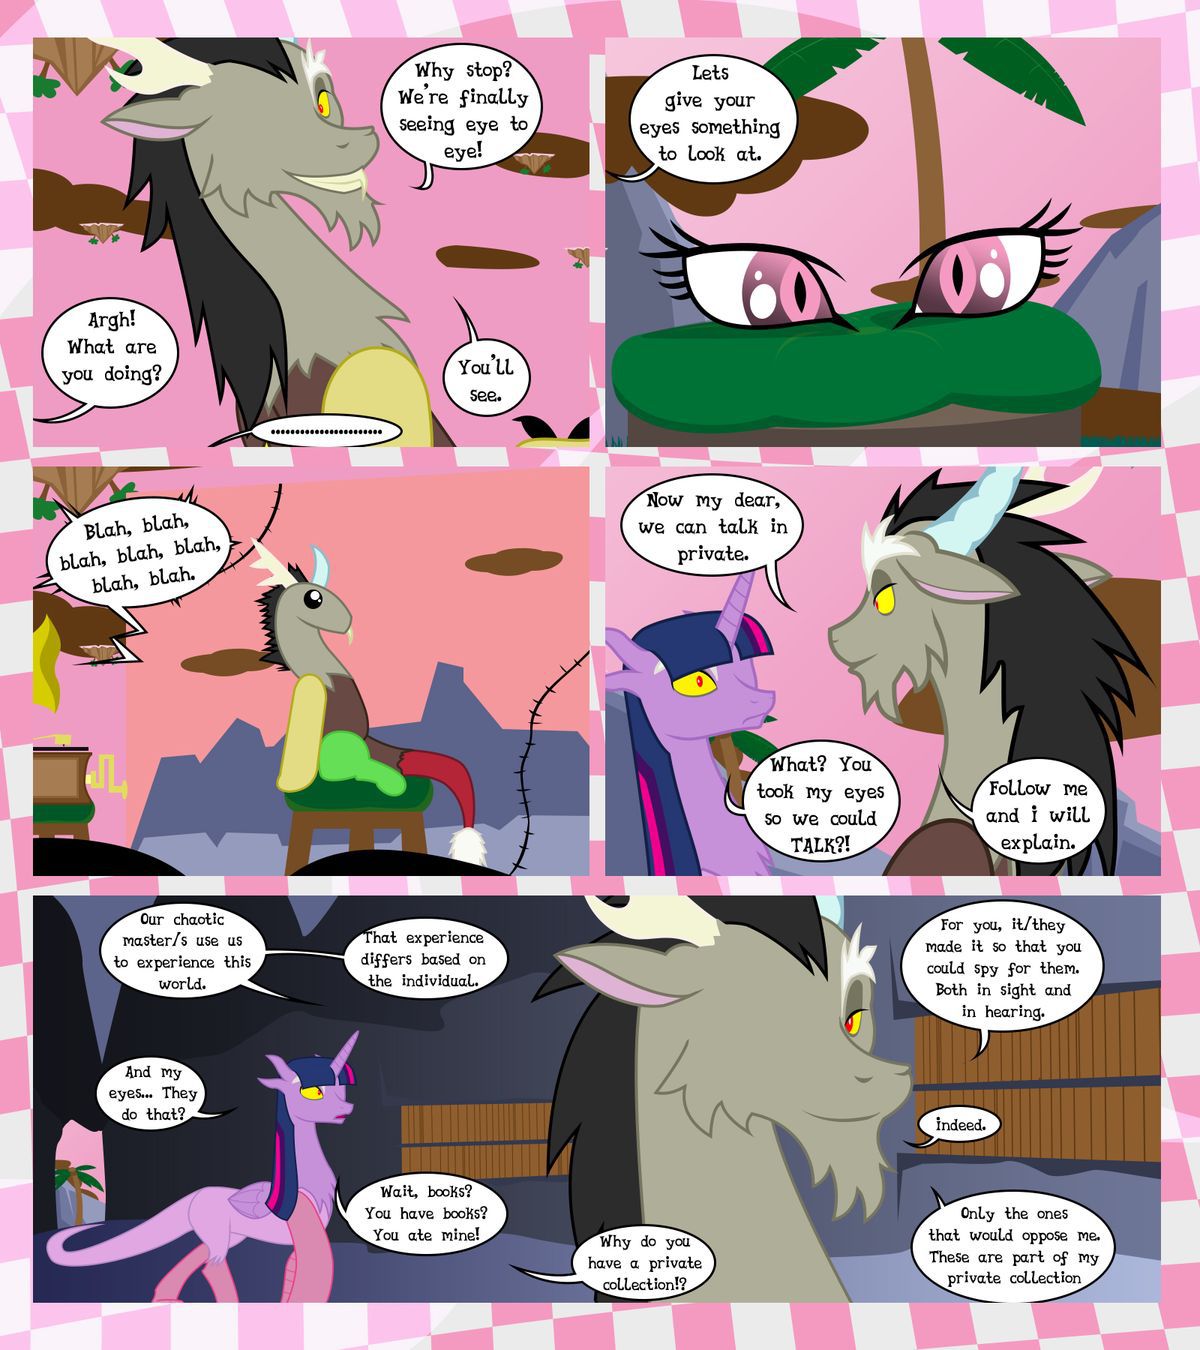 [GatesMcCloud] Cutie Mark Crusaders 10k: Chapter 3 - The Lost (My Little Pony: Friendship is Magic) [English] [Ongoing] 24